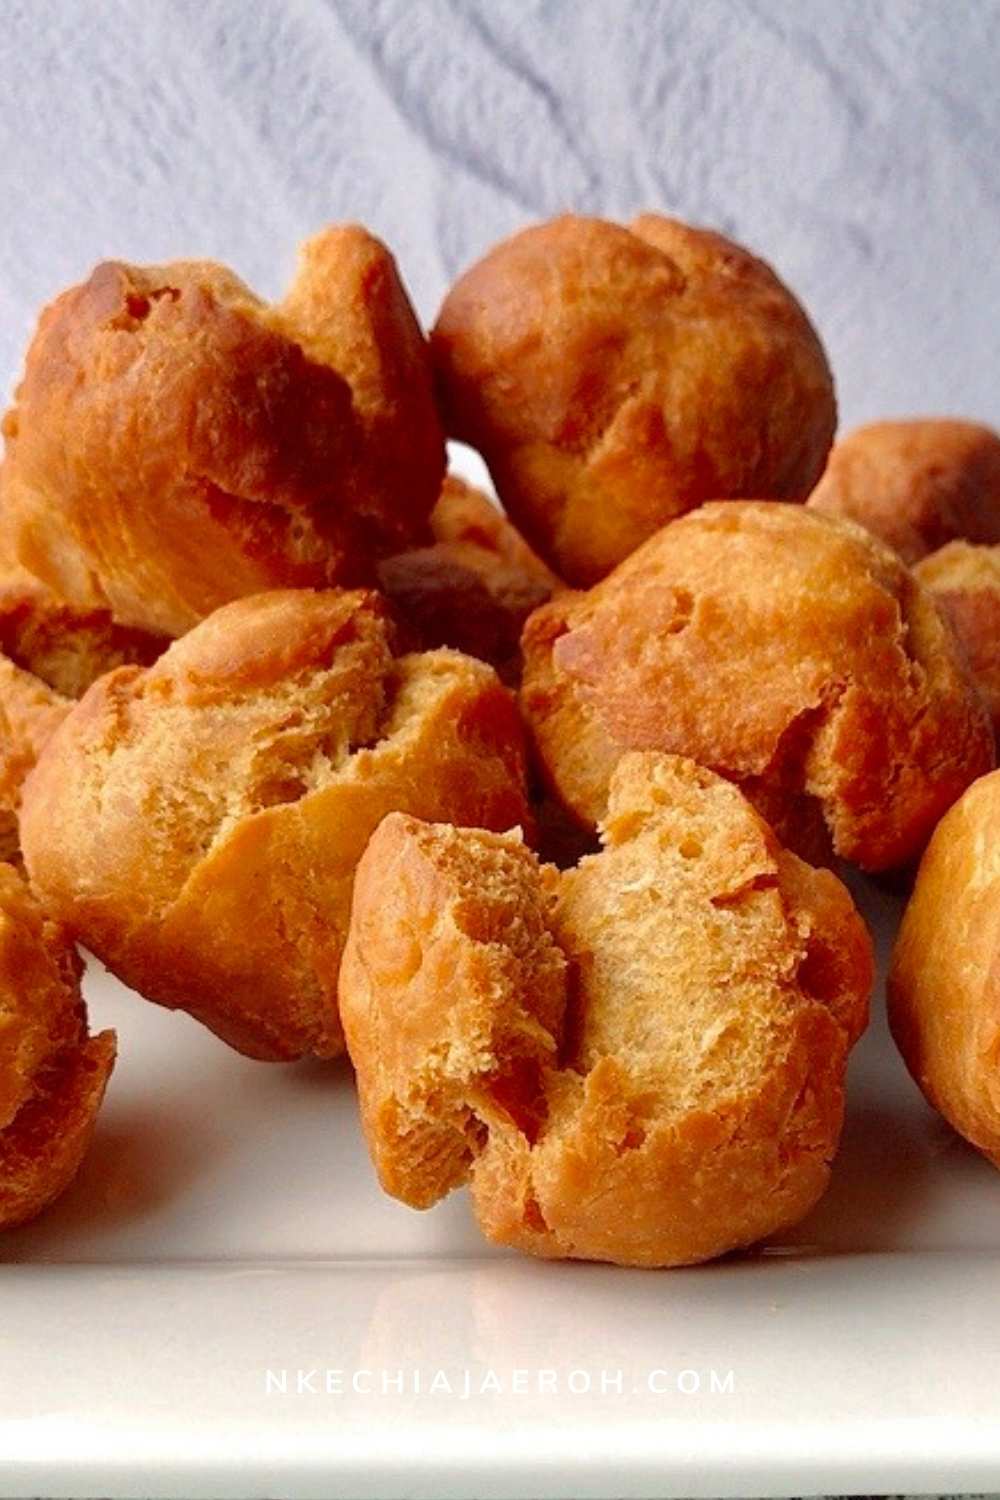 Nigerian buns are one of the most favorite Nigerian snacks – crunchy on the outside, pillowy and soft on the inside, flavorful, satisfying, and incredibly delicious!